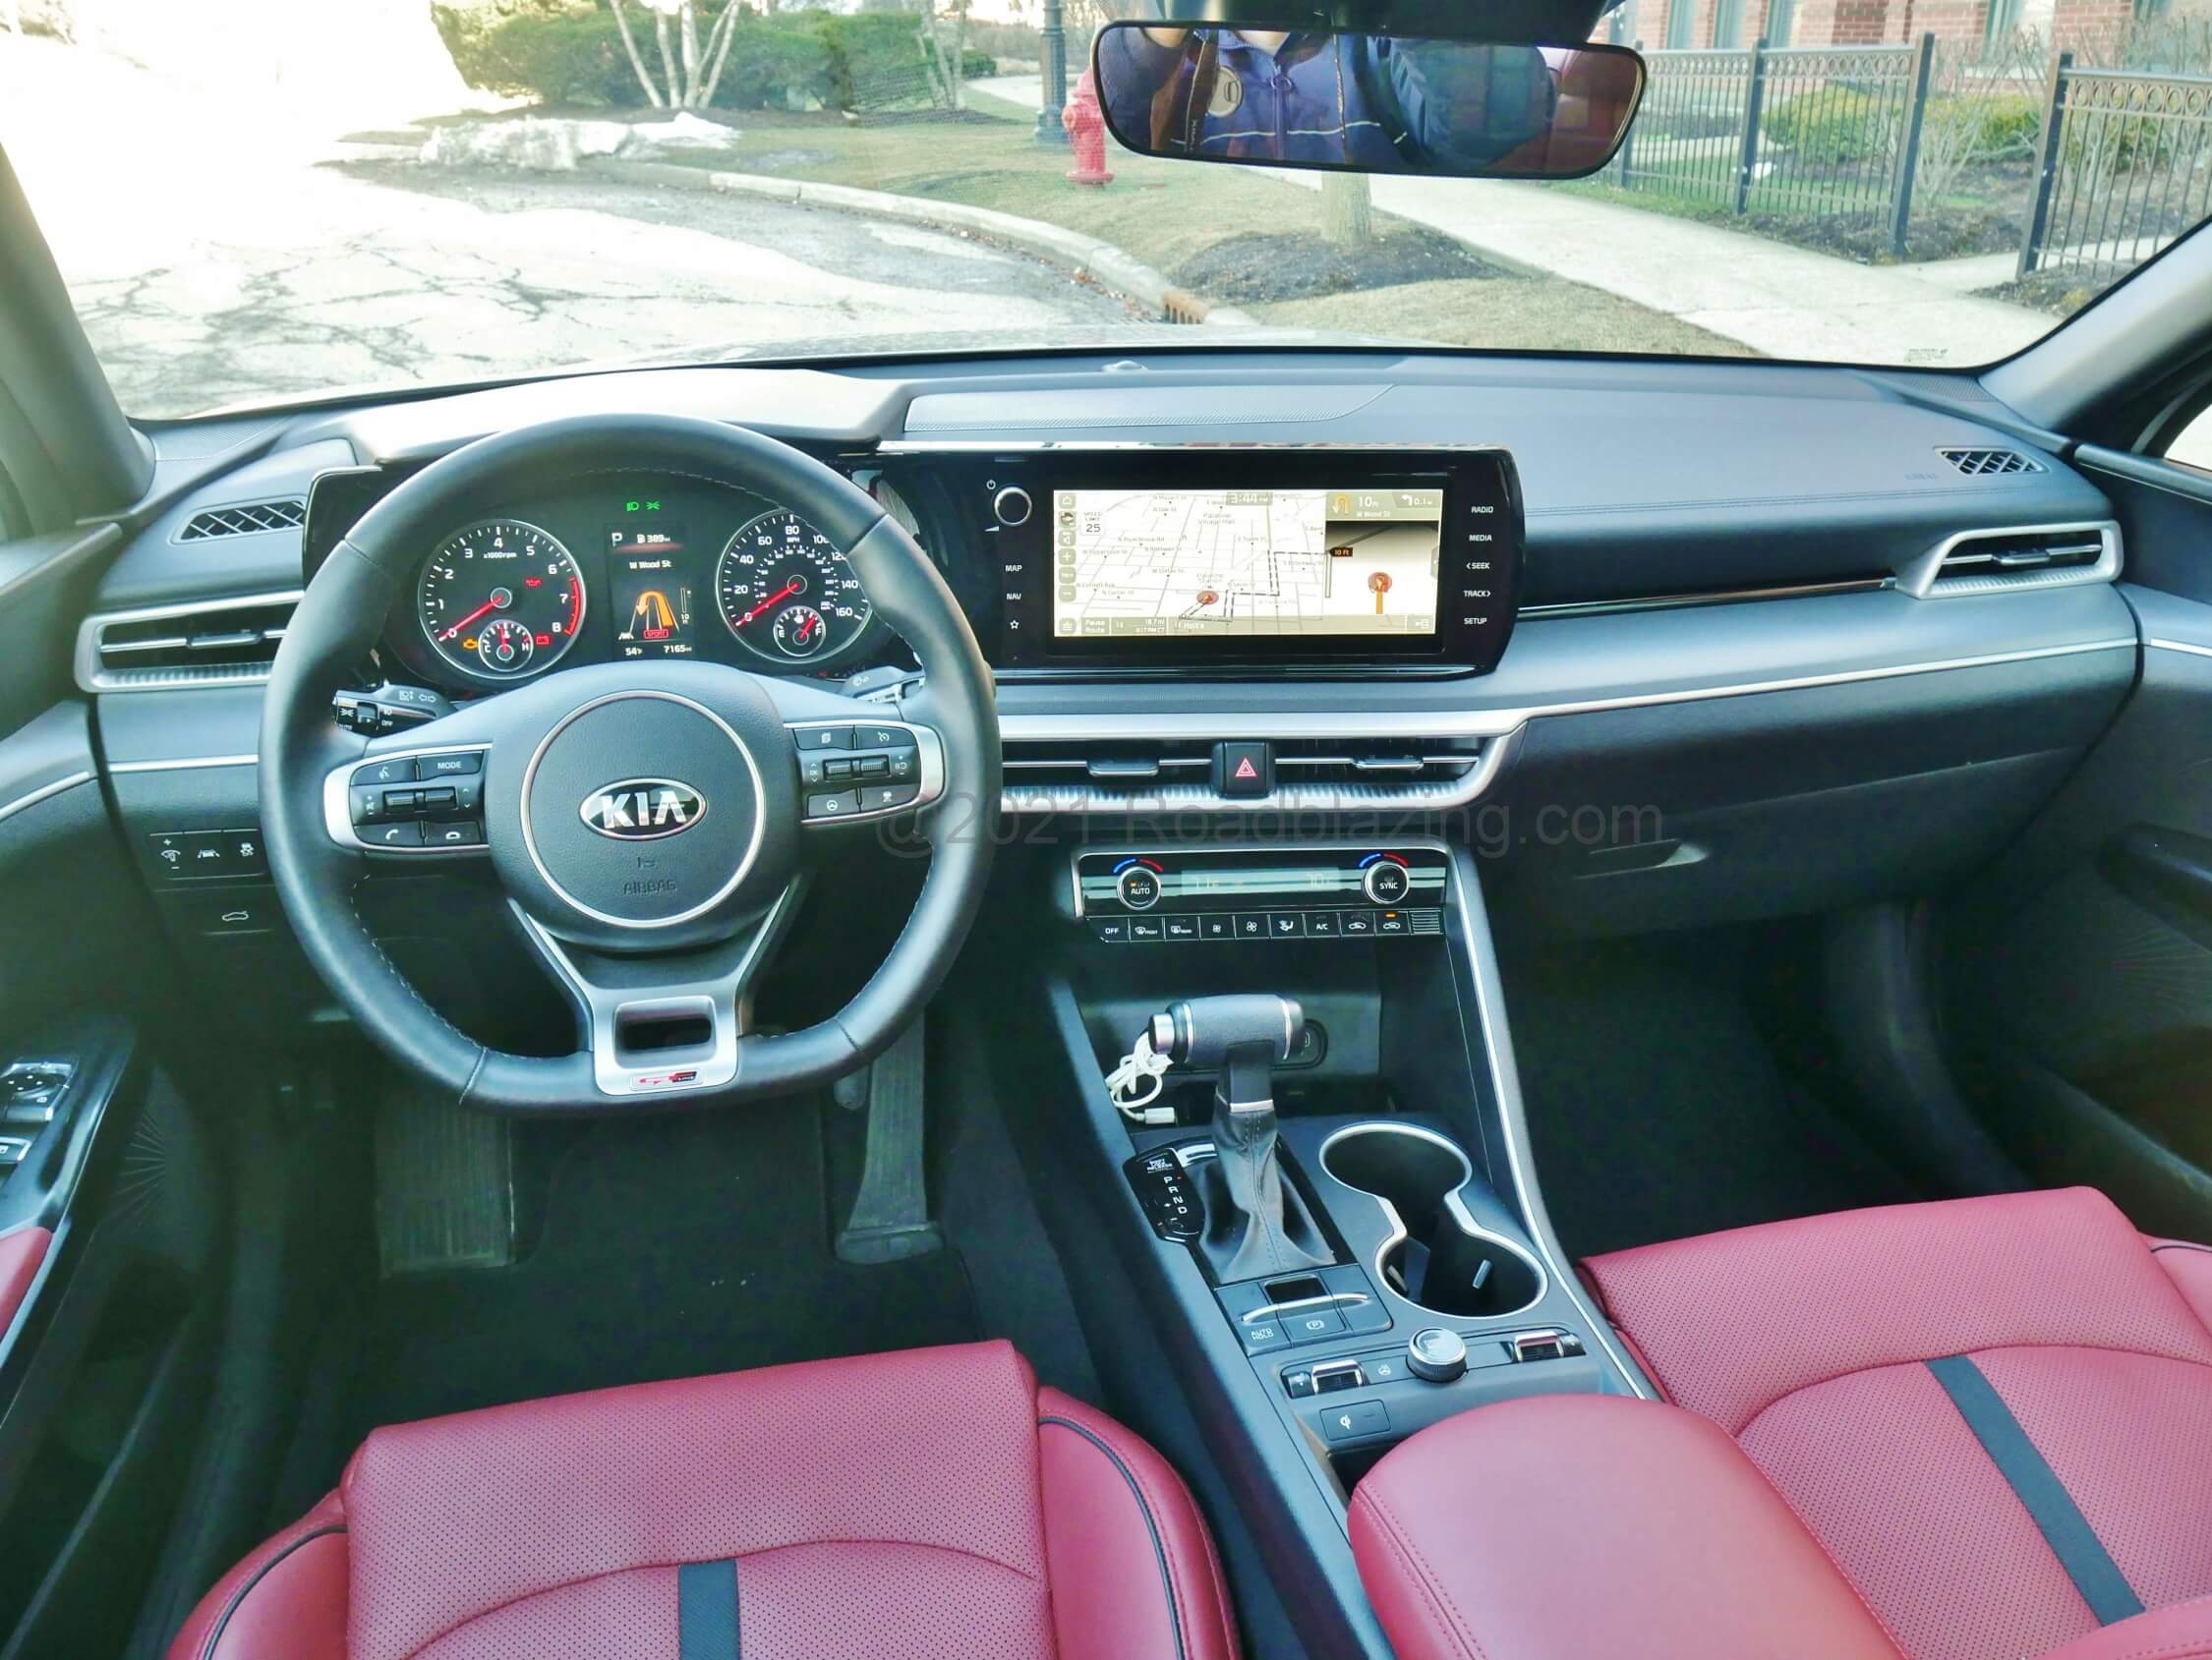 2021 Kia K5 GT-Line AWD: Expansive low cowl Euro styled cockpit with twin analog gauges and 10.25" split screen, swipe touch LCD infotainment display